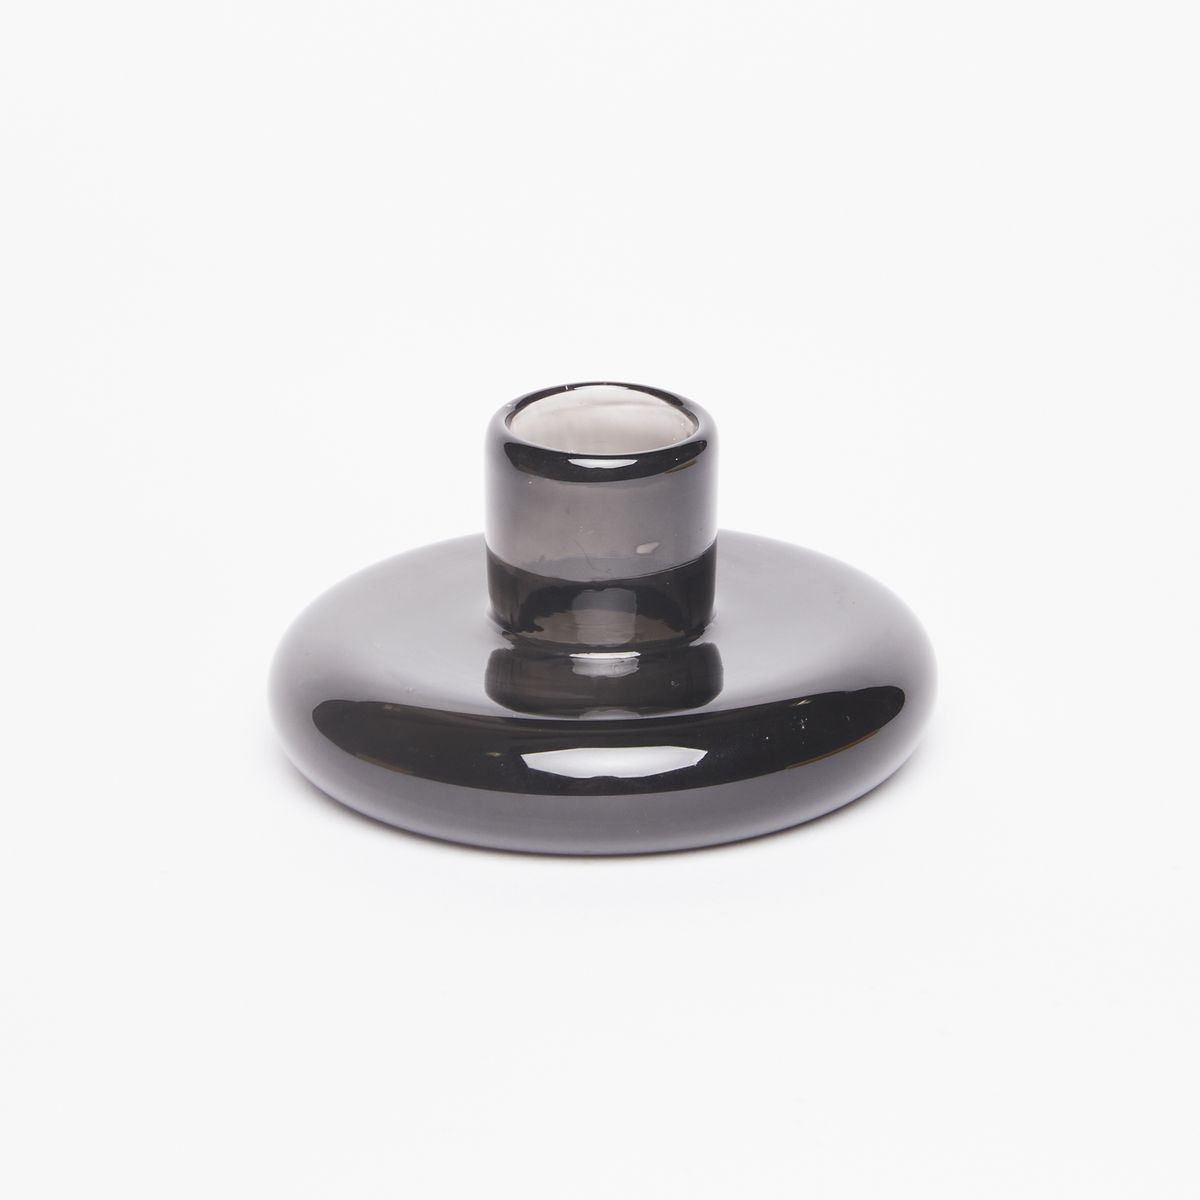 Candle holder made of a clear dark grey glass disc-like base with a small cup for the candle at center